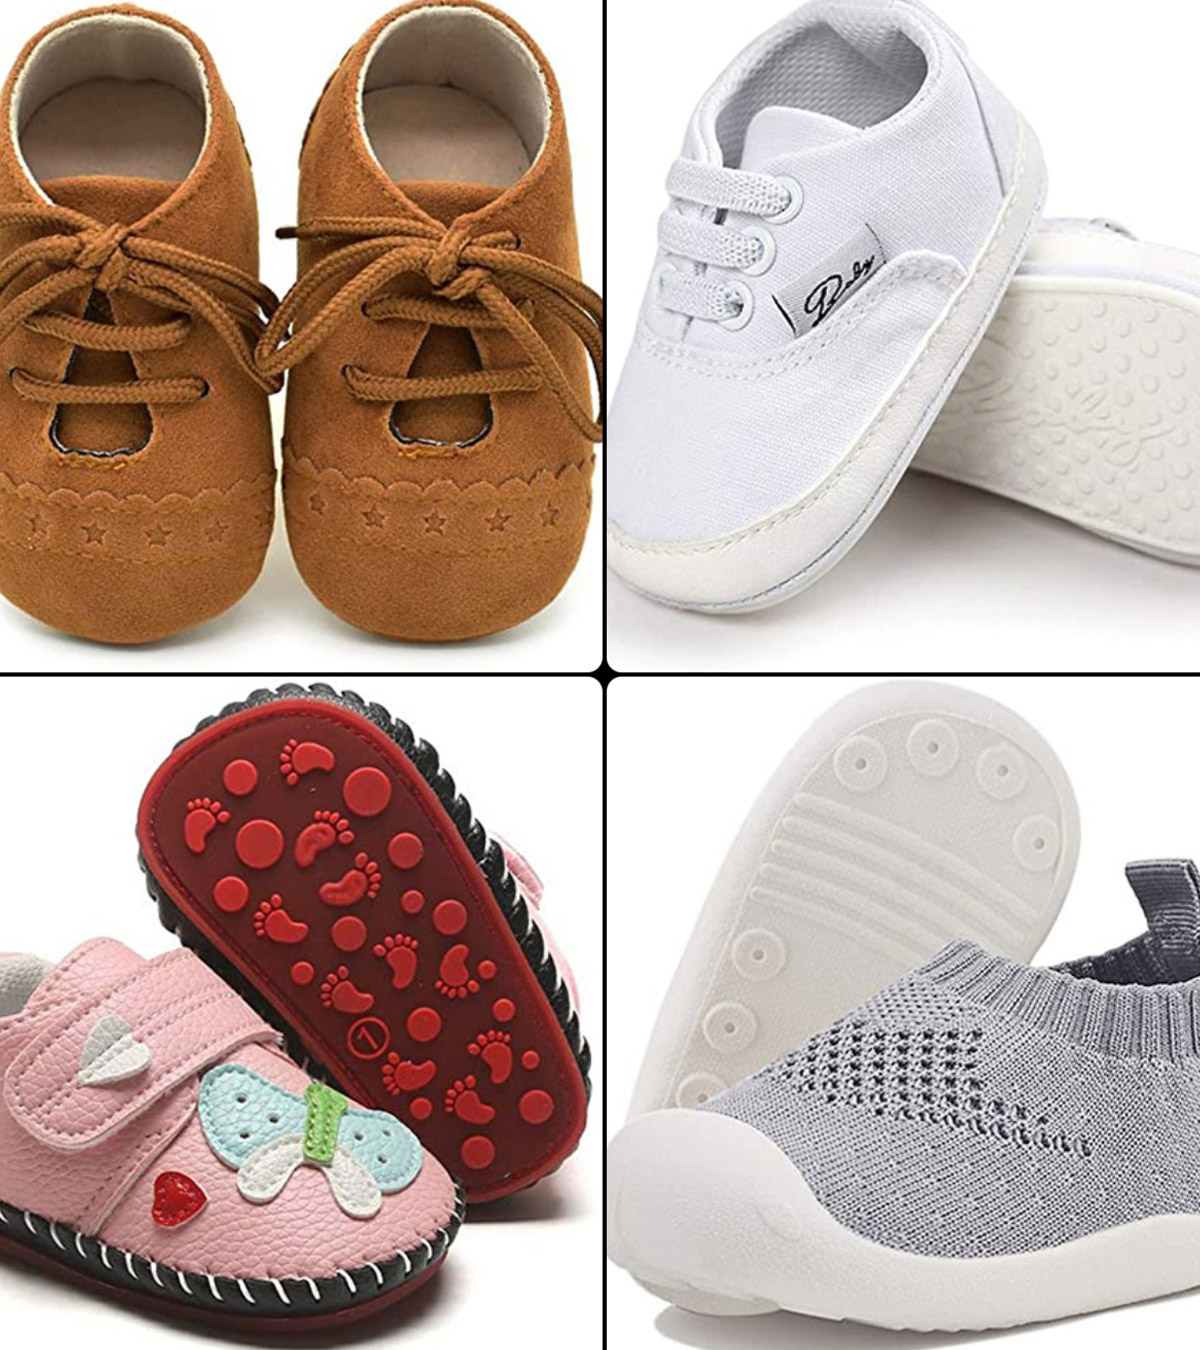 13 Best Baby Shoes Of 2020